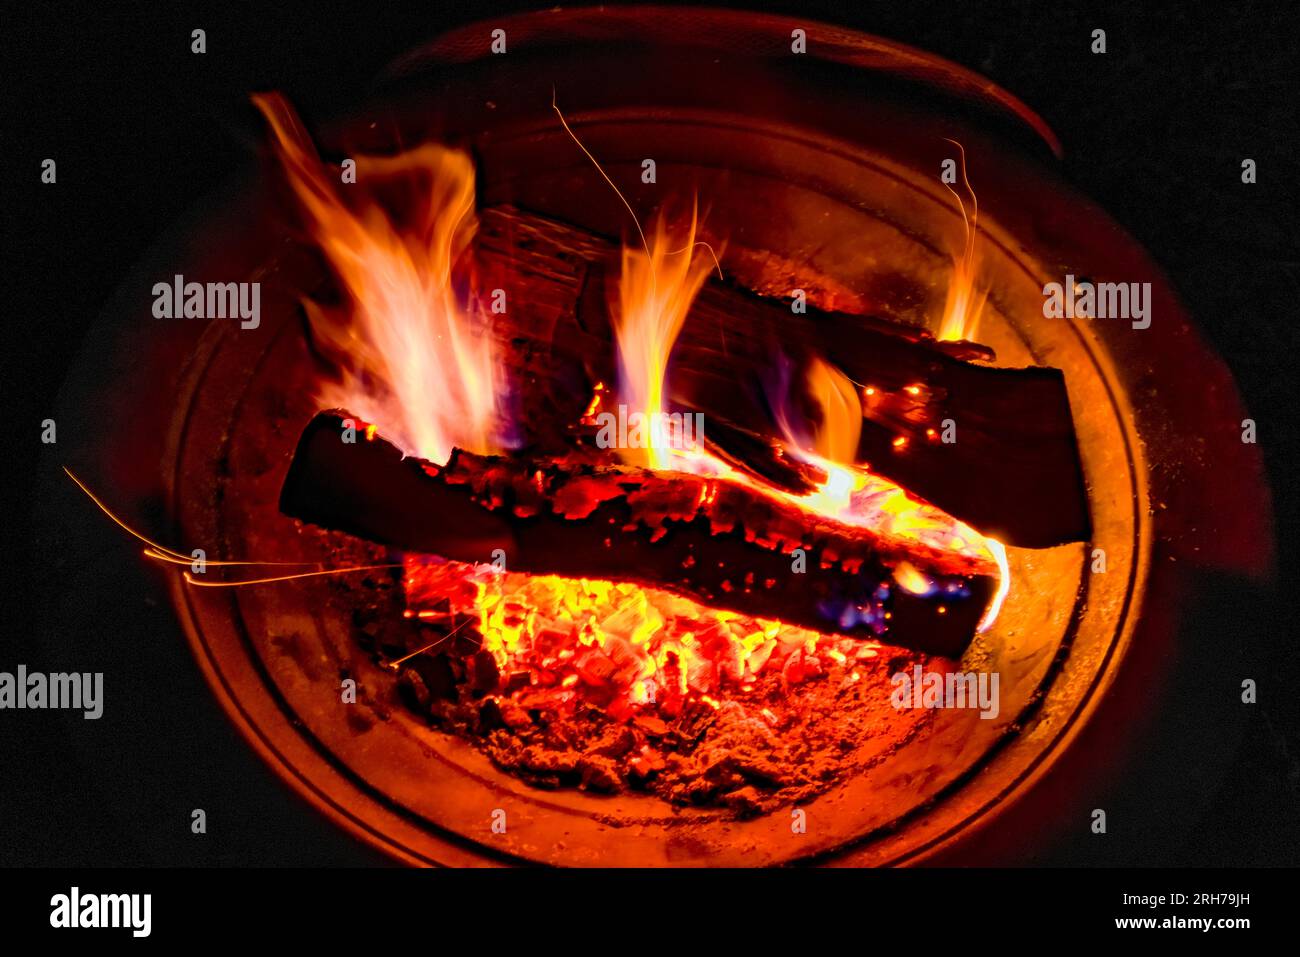 A camp fire burns in the night. Stock Photo